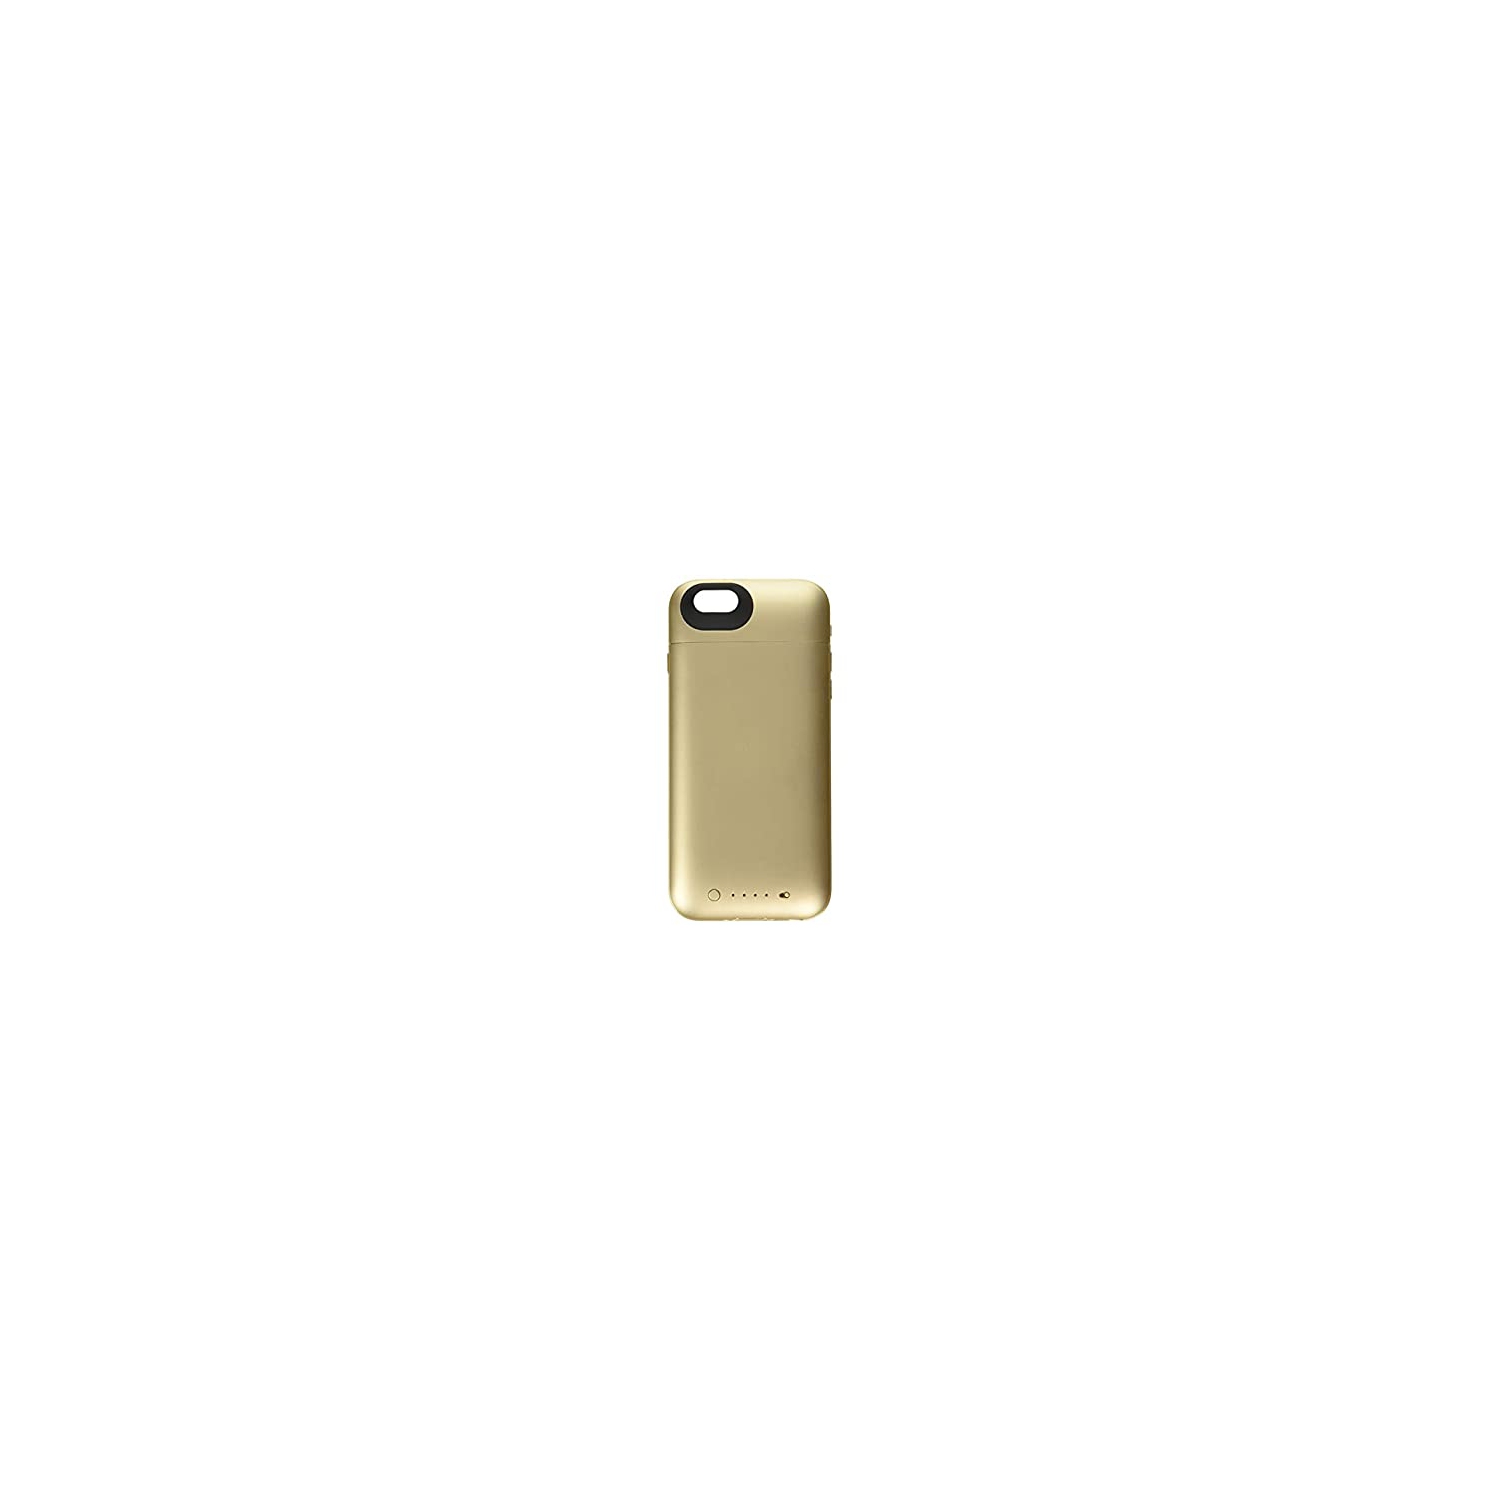 mophie juice pack Plus Battery Case for Apple iPhone 6 iPhone 6s (3, 300 mAh) - Gold